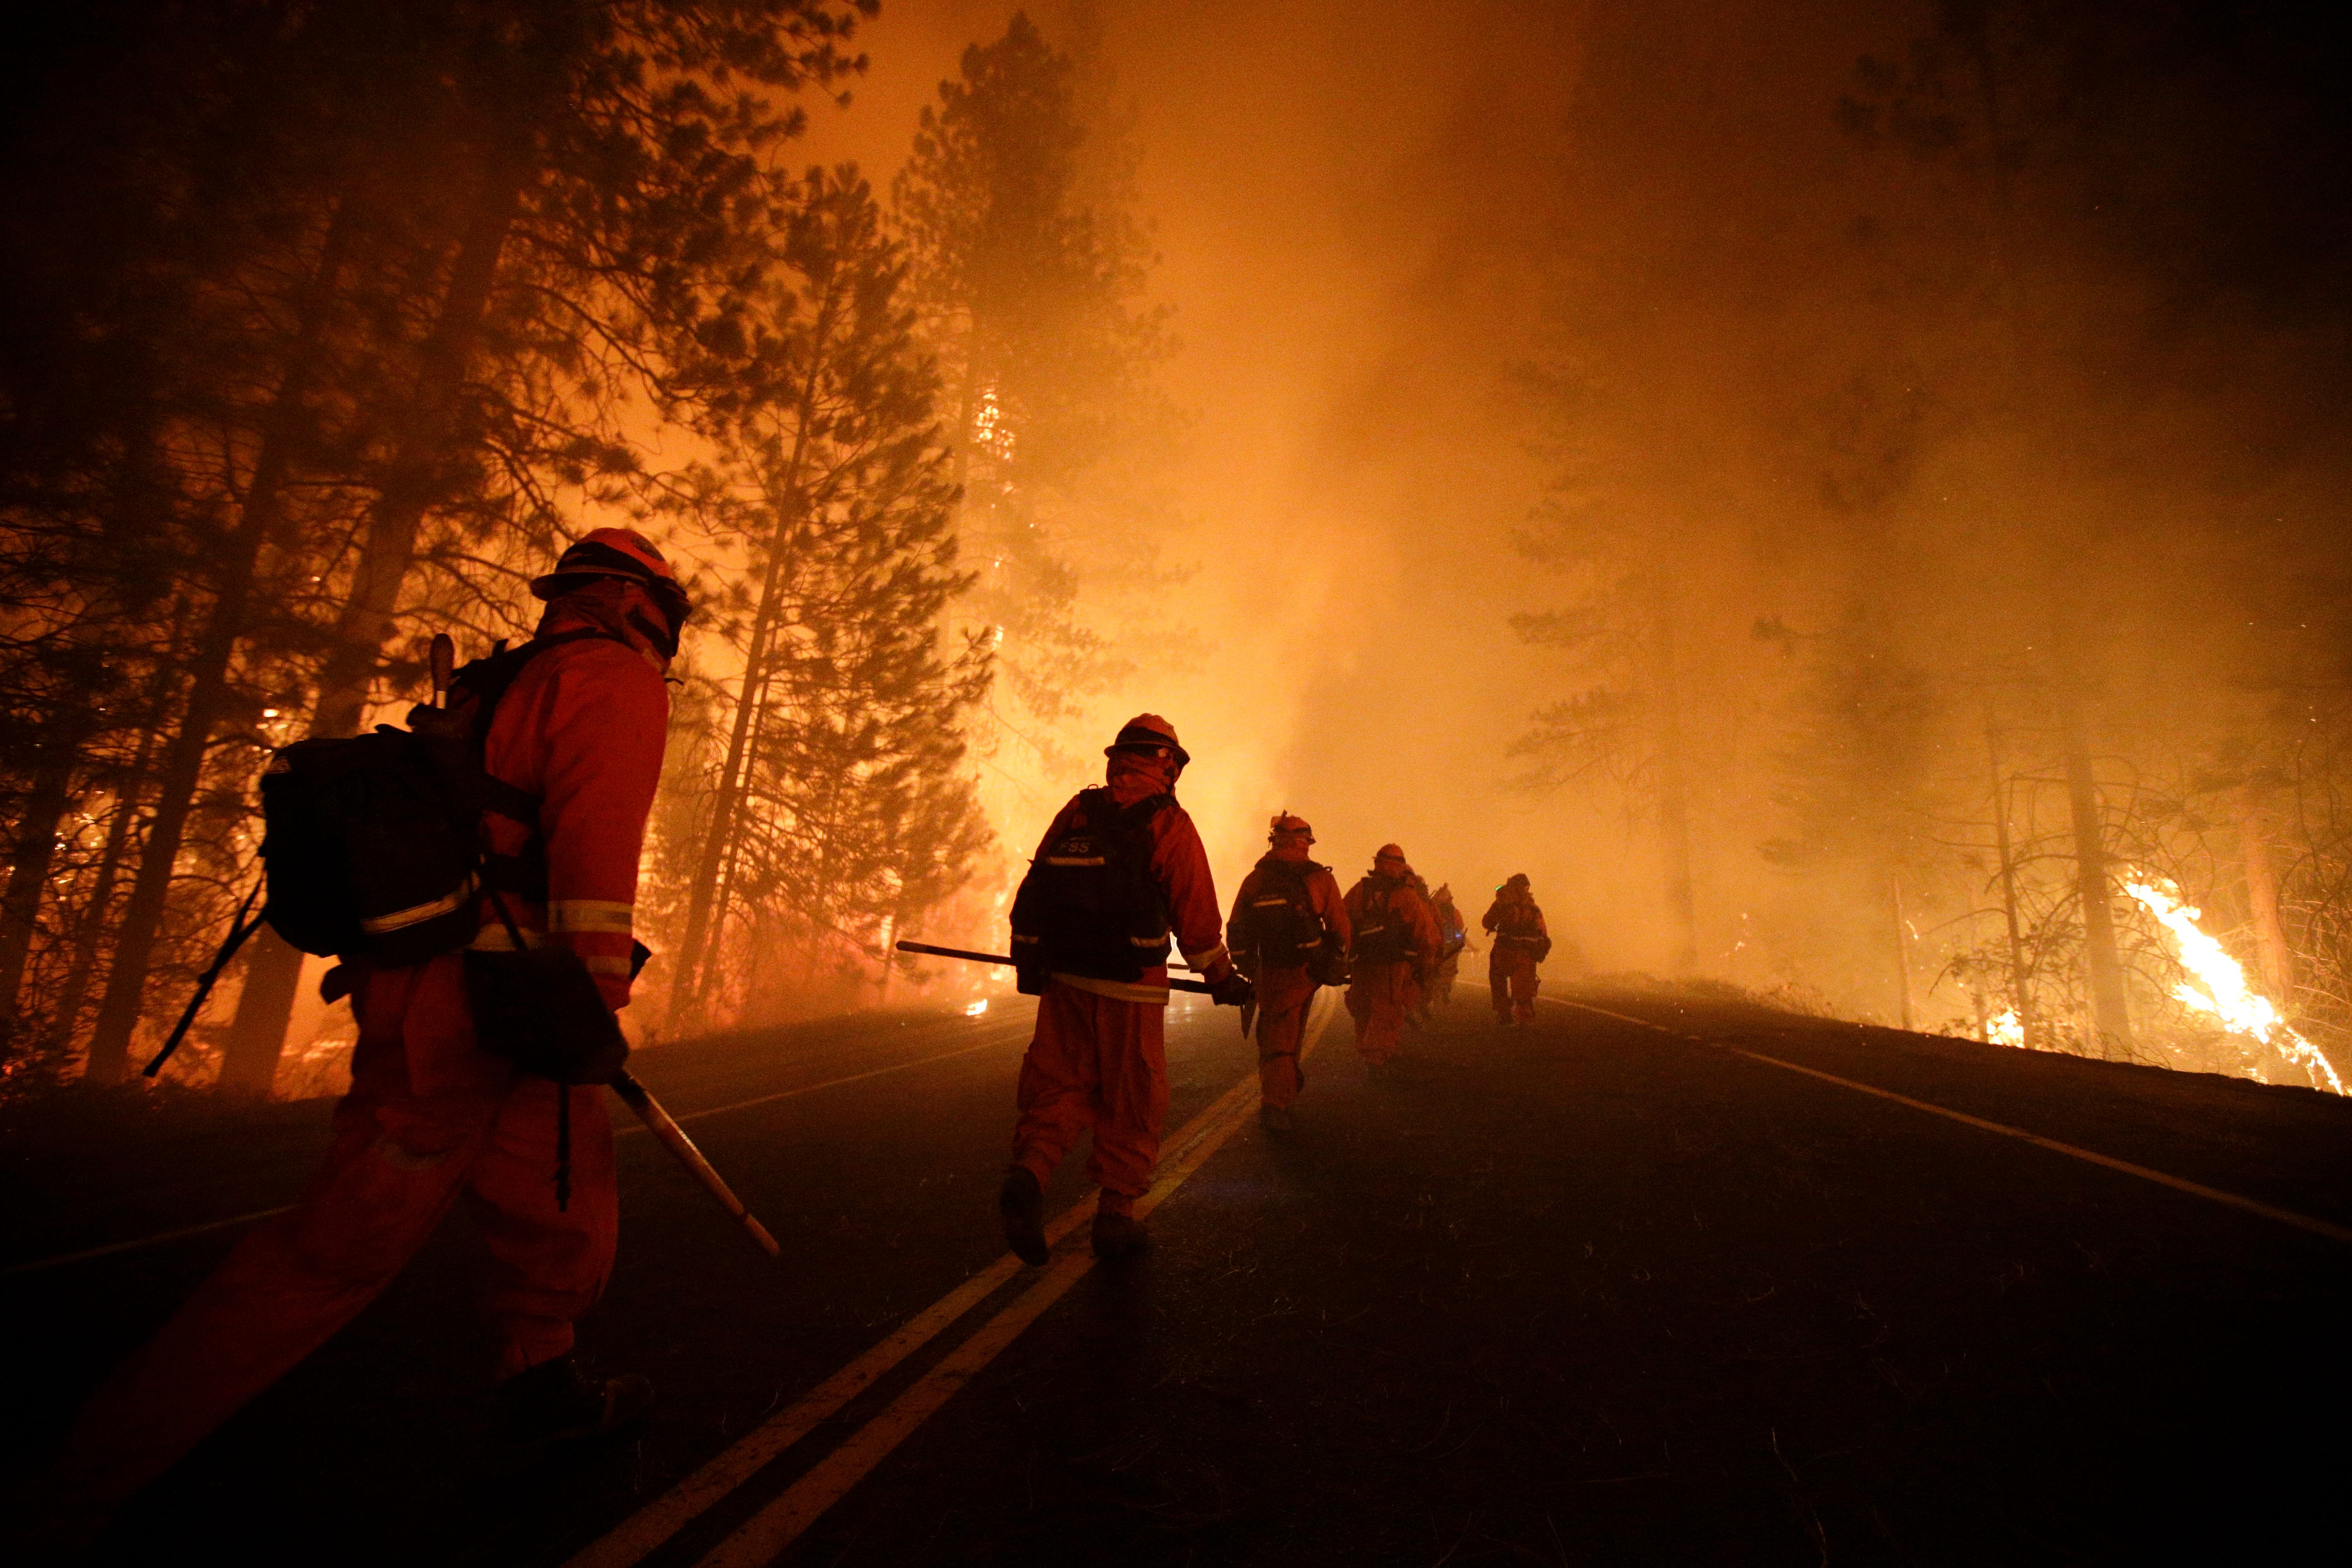 Yosemite fire is 'highest priority' in nation